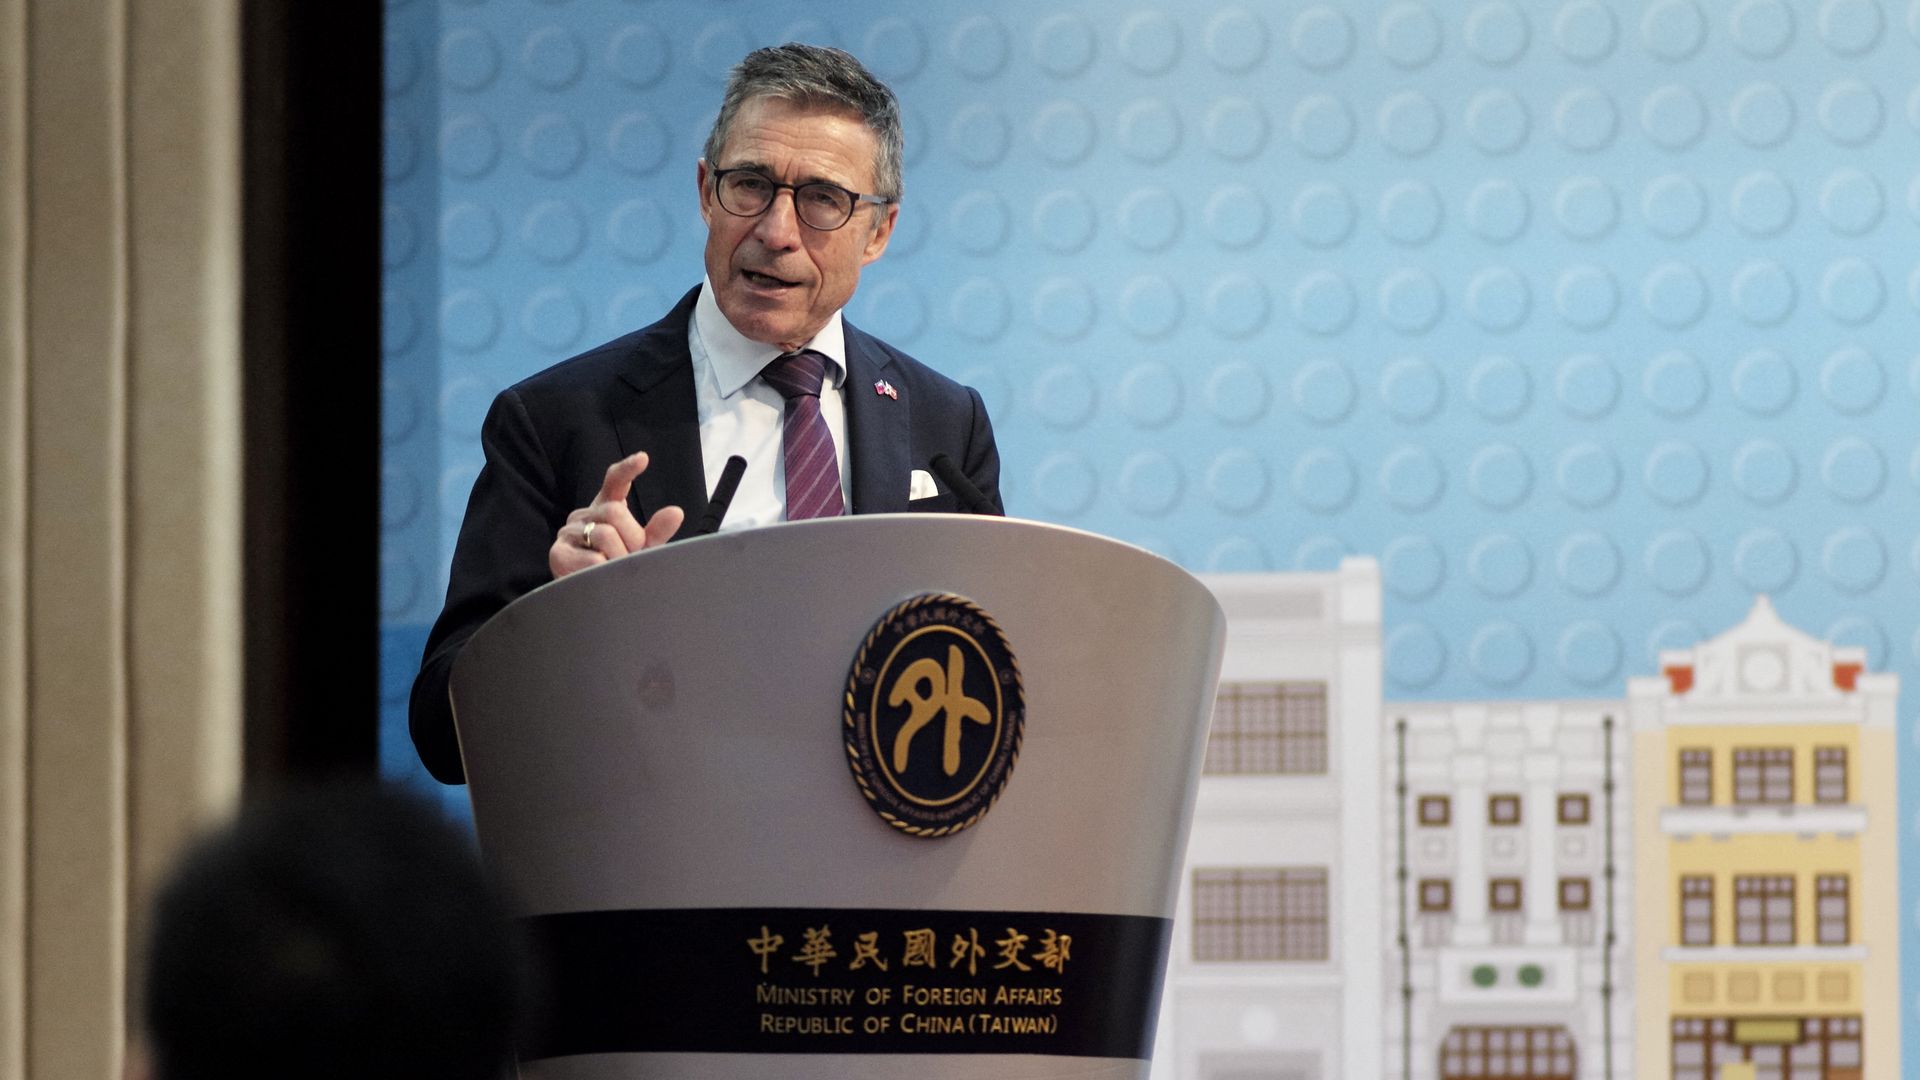 Former NATO chief Anders Fogh Rasmussen speaks during a press conference at the Ministry of Foreign Affairs (MOFA) in Taipei on January 5, 2023. 